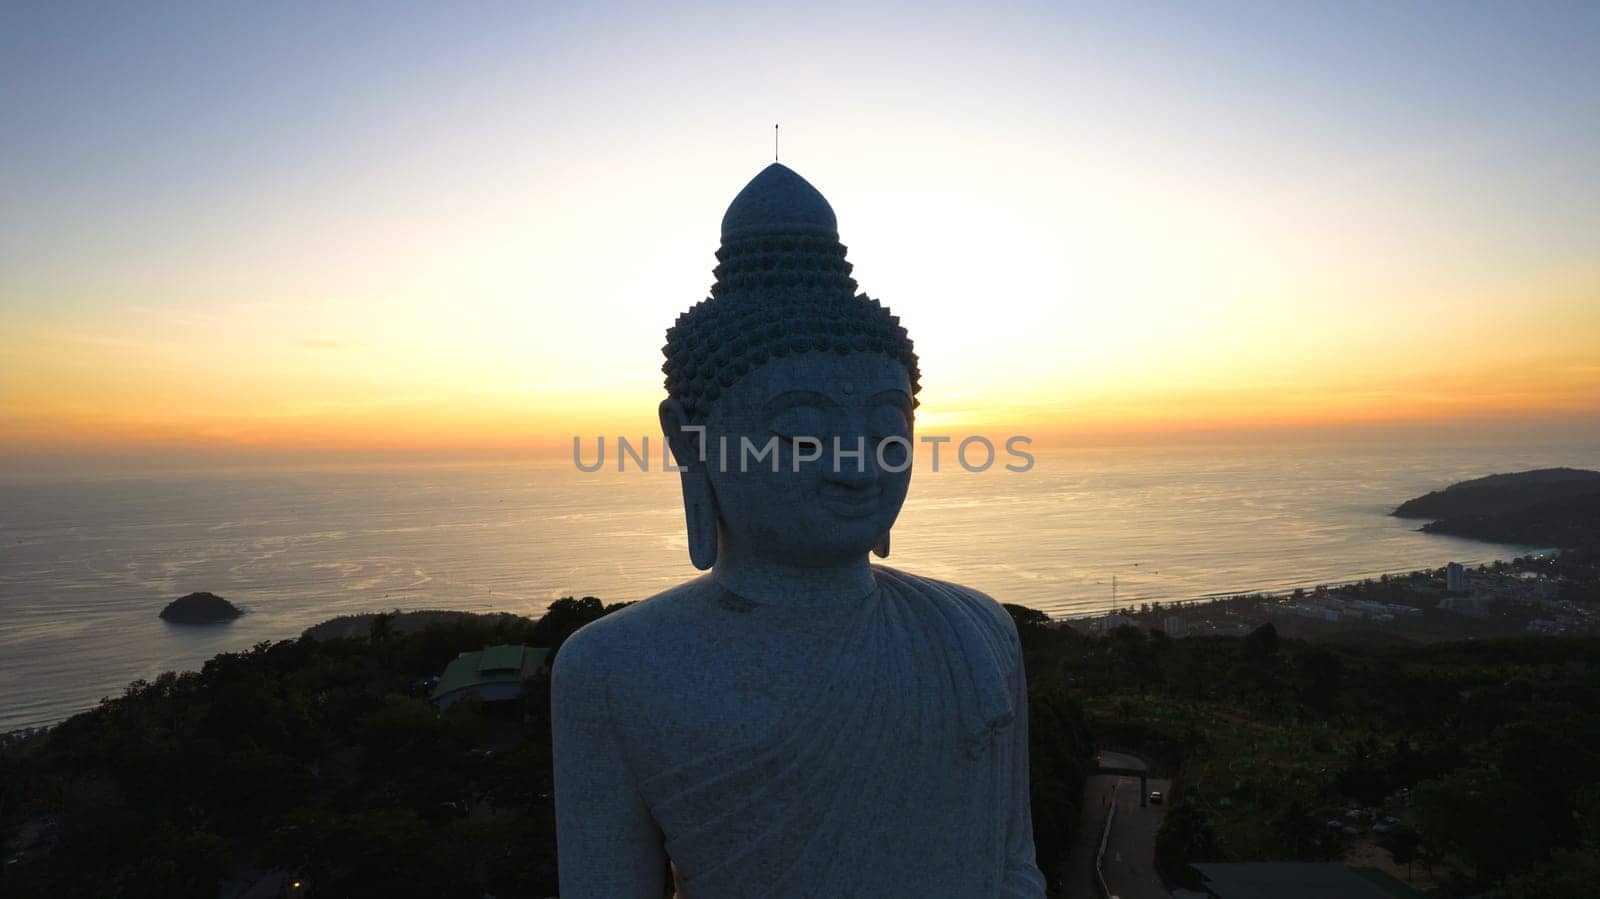 Big Buddha at sunset view from a drone. Phuket by Passcal